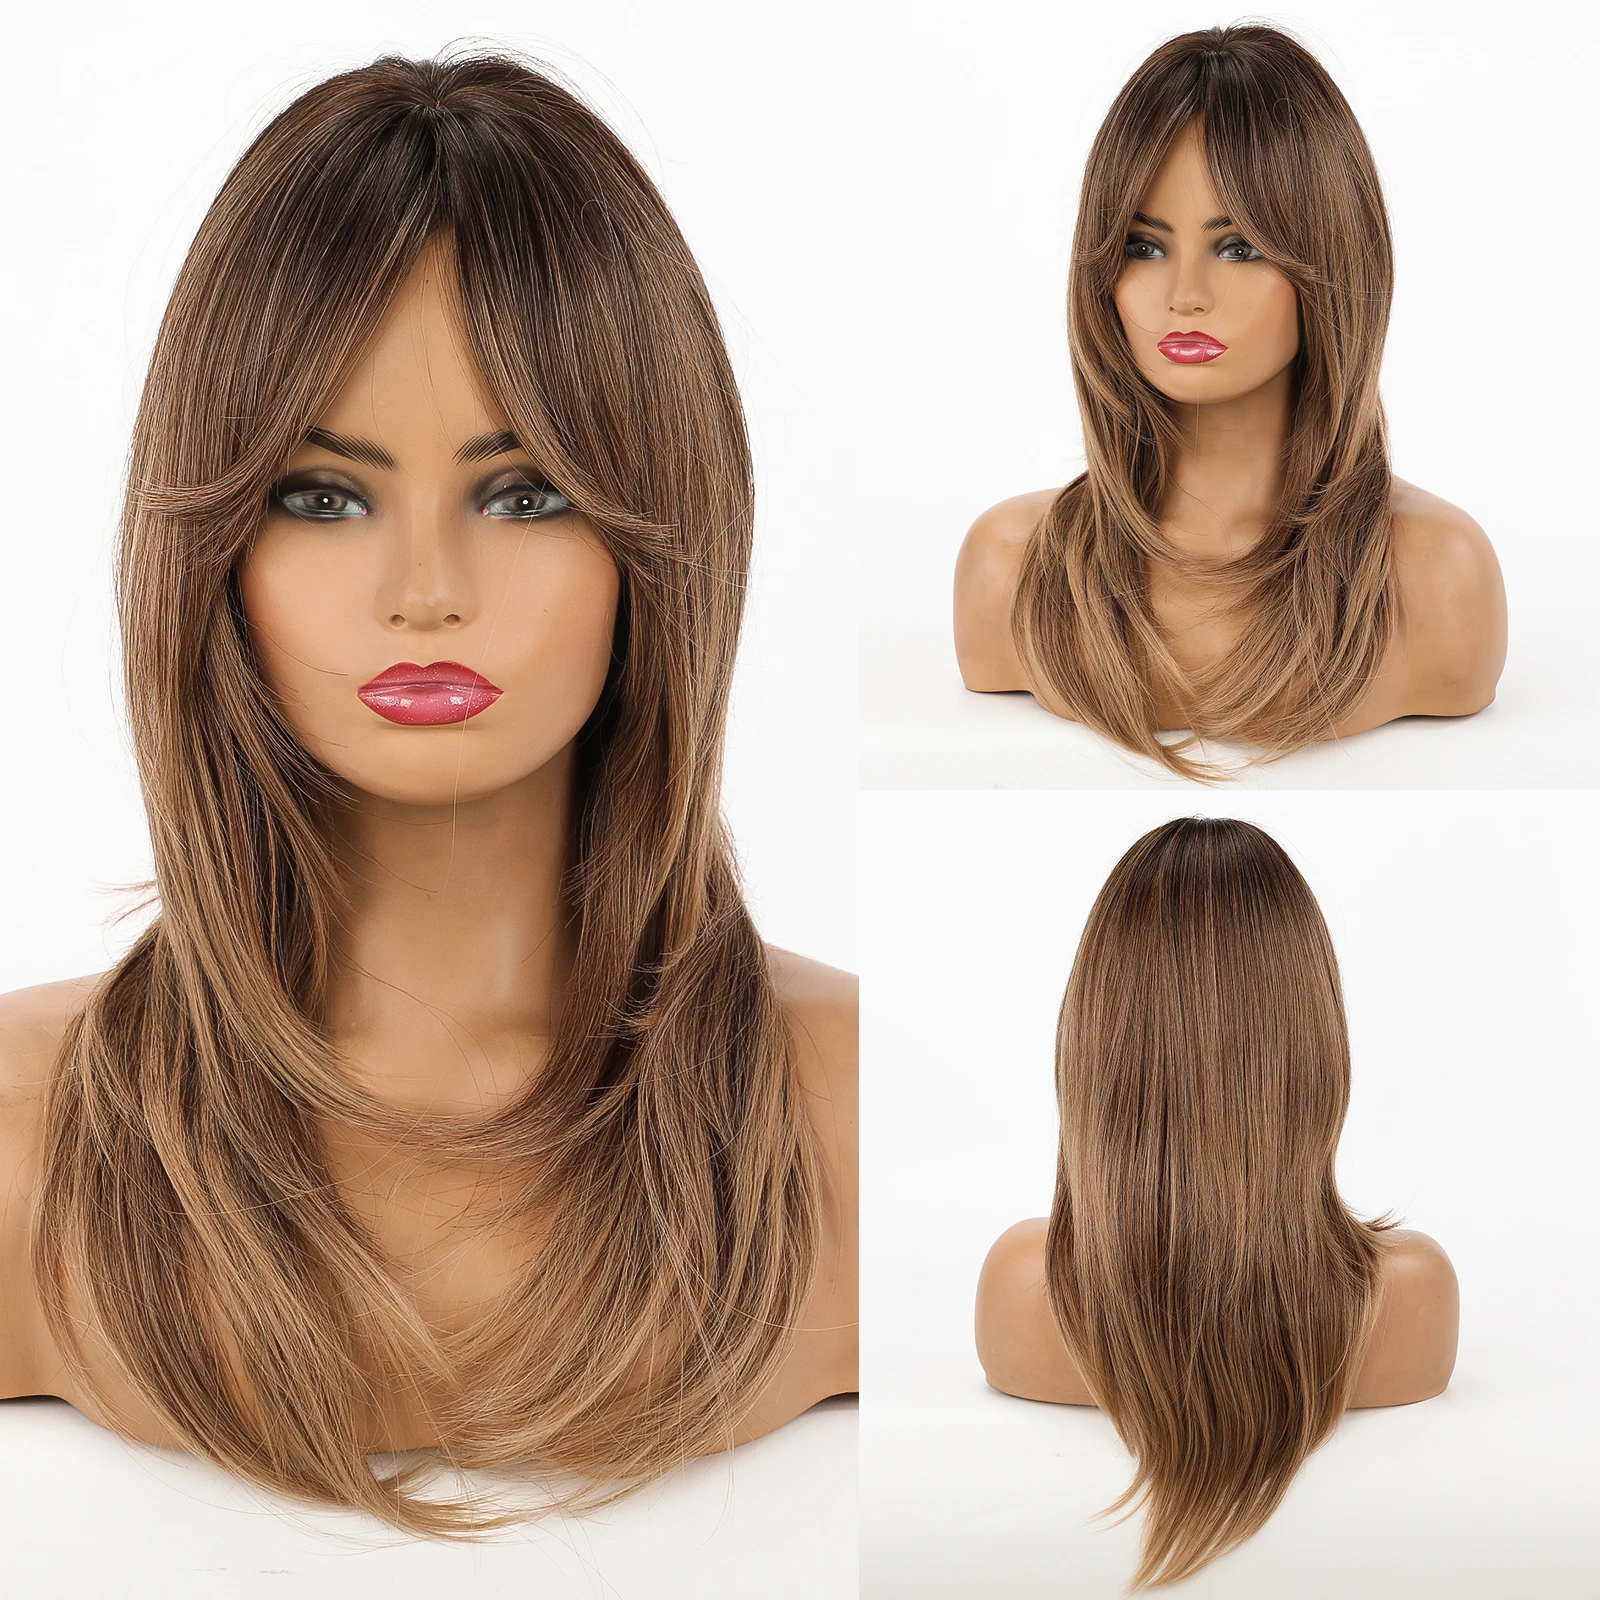 

Long Straight Synthetic Wig Hair Ombre Black Brown Highlight Blonde Natural Wavy Layered Wigs with Side Bangs for African Women